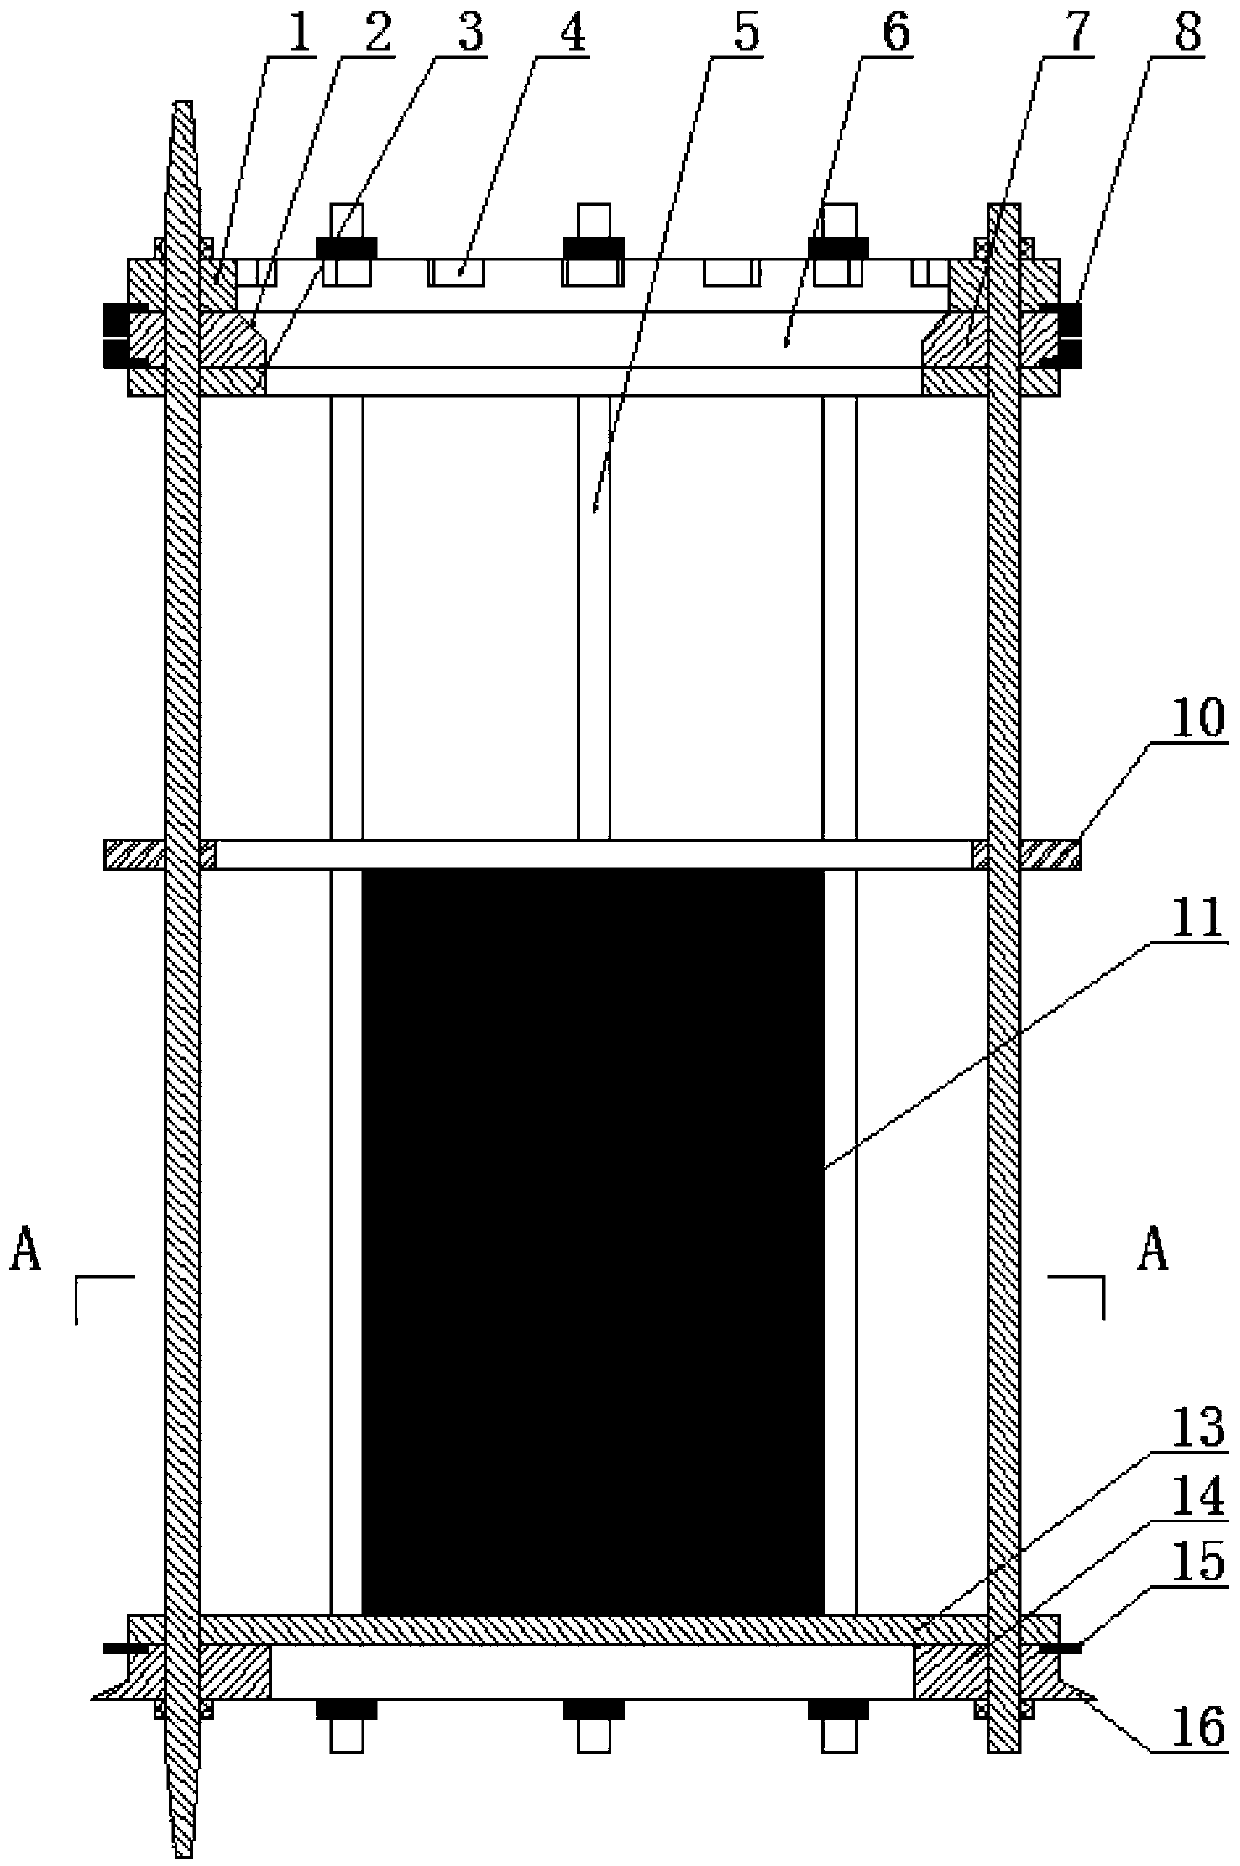 Pressure-holding ejection structure for steam ejection organic waste disposer